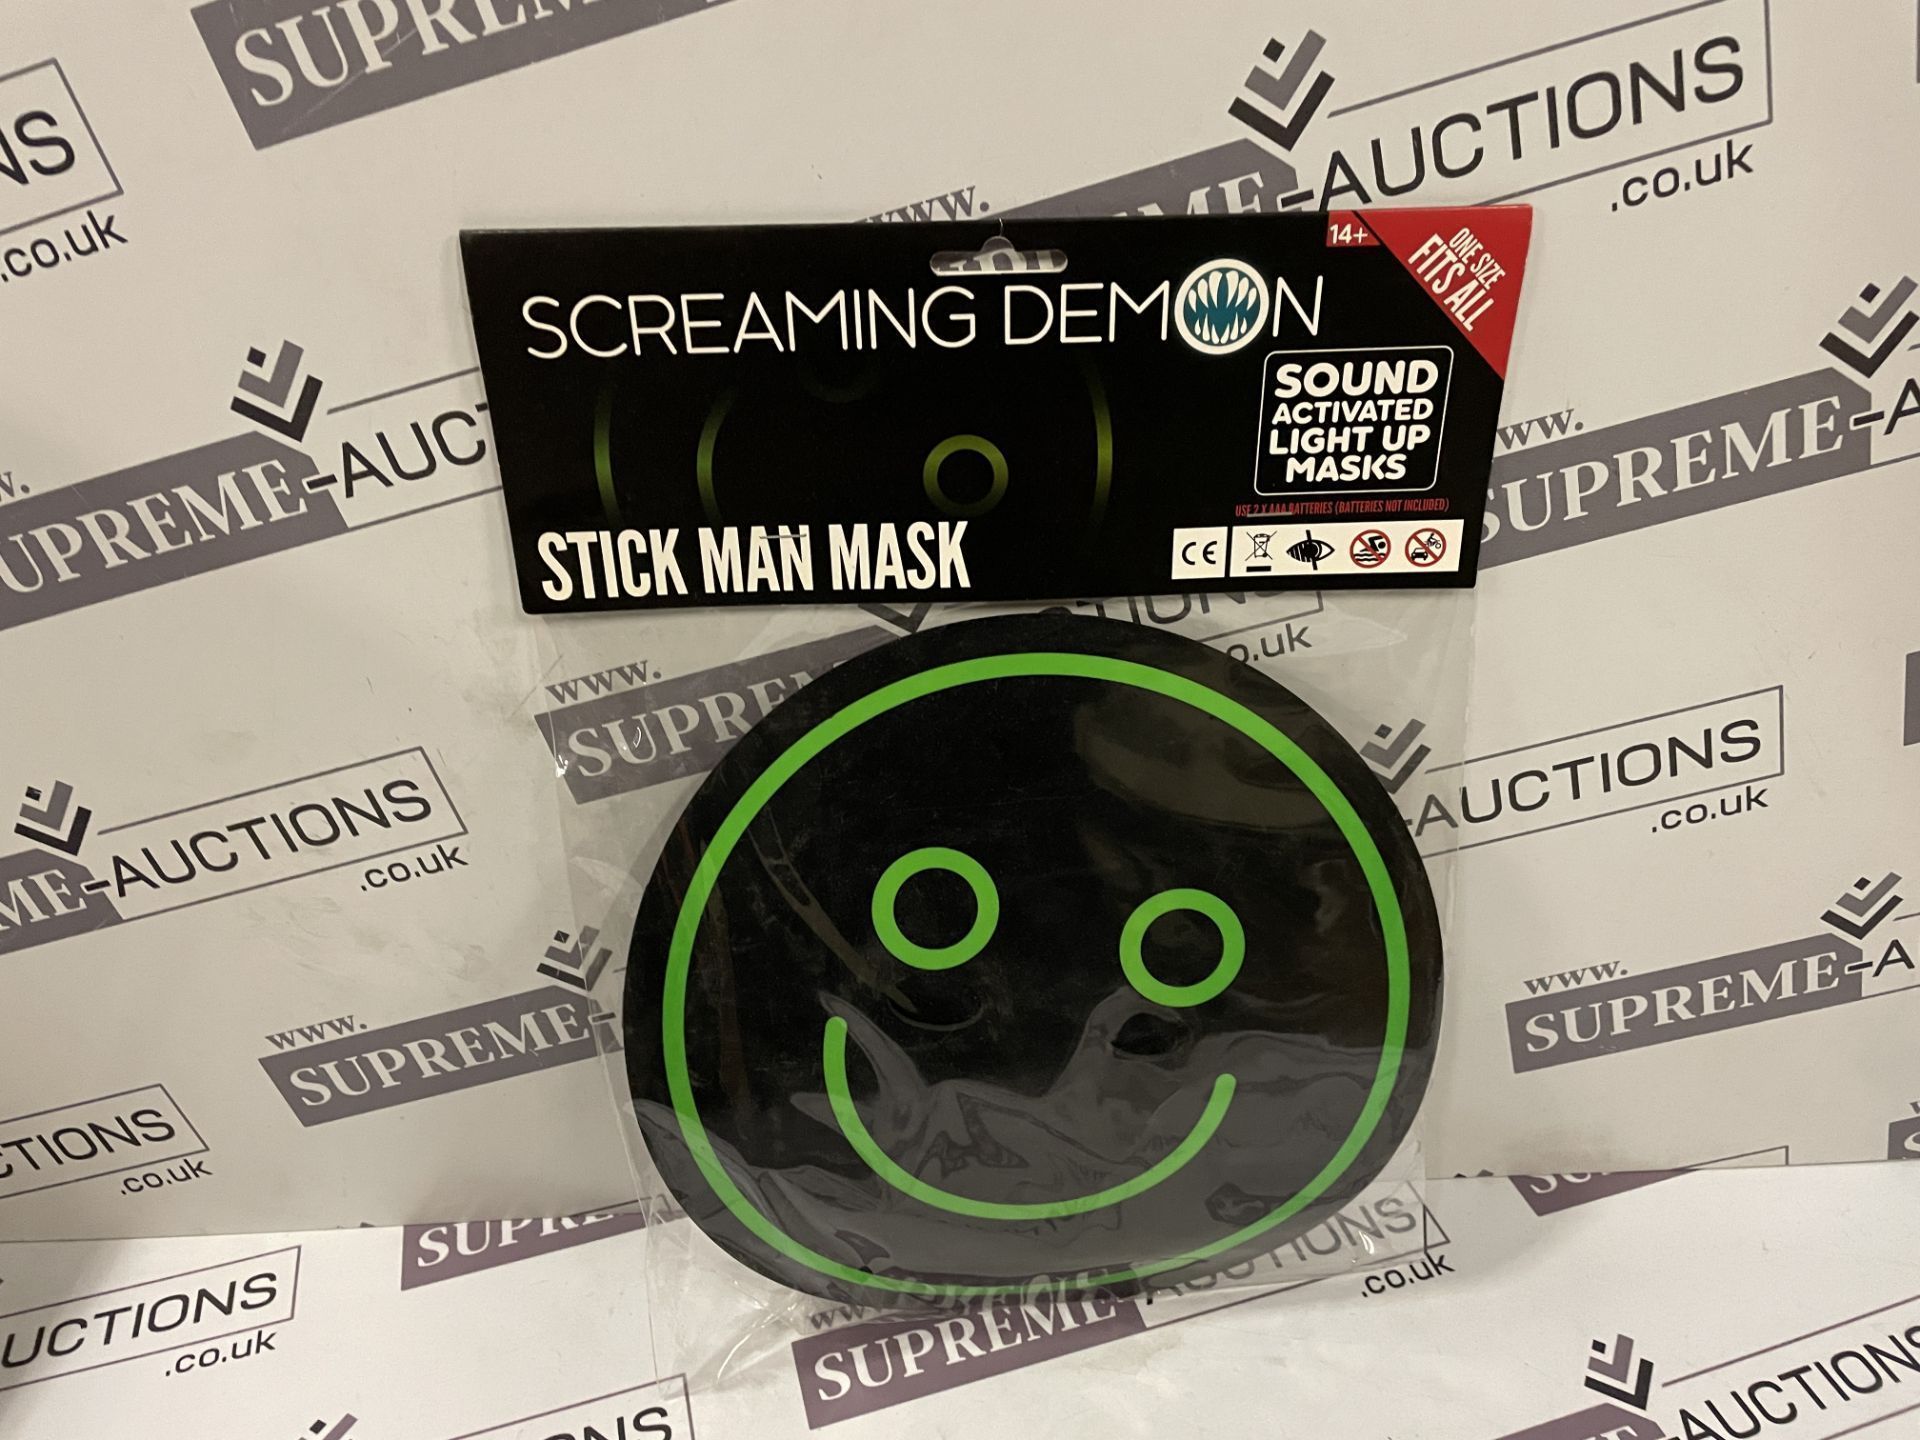 40 X BRAND NEW SCREAMING DEMON SOUND ACTIVATED LIGHT UP MASKS (DESIGNS MAY VARY) R11-11